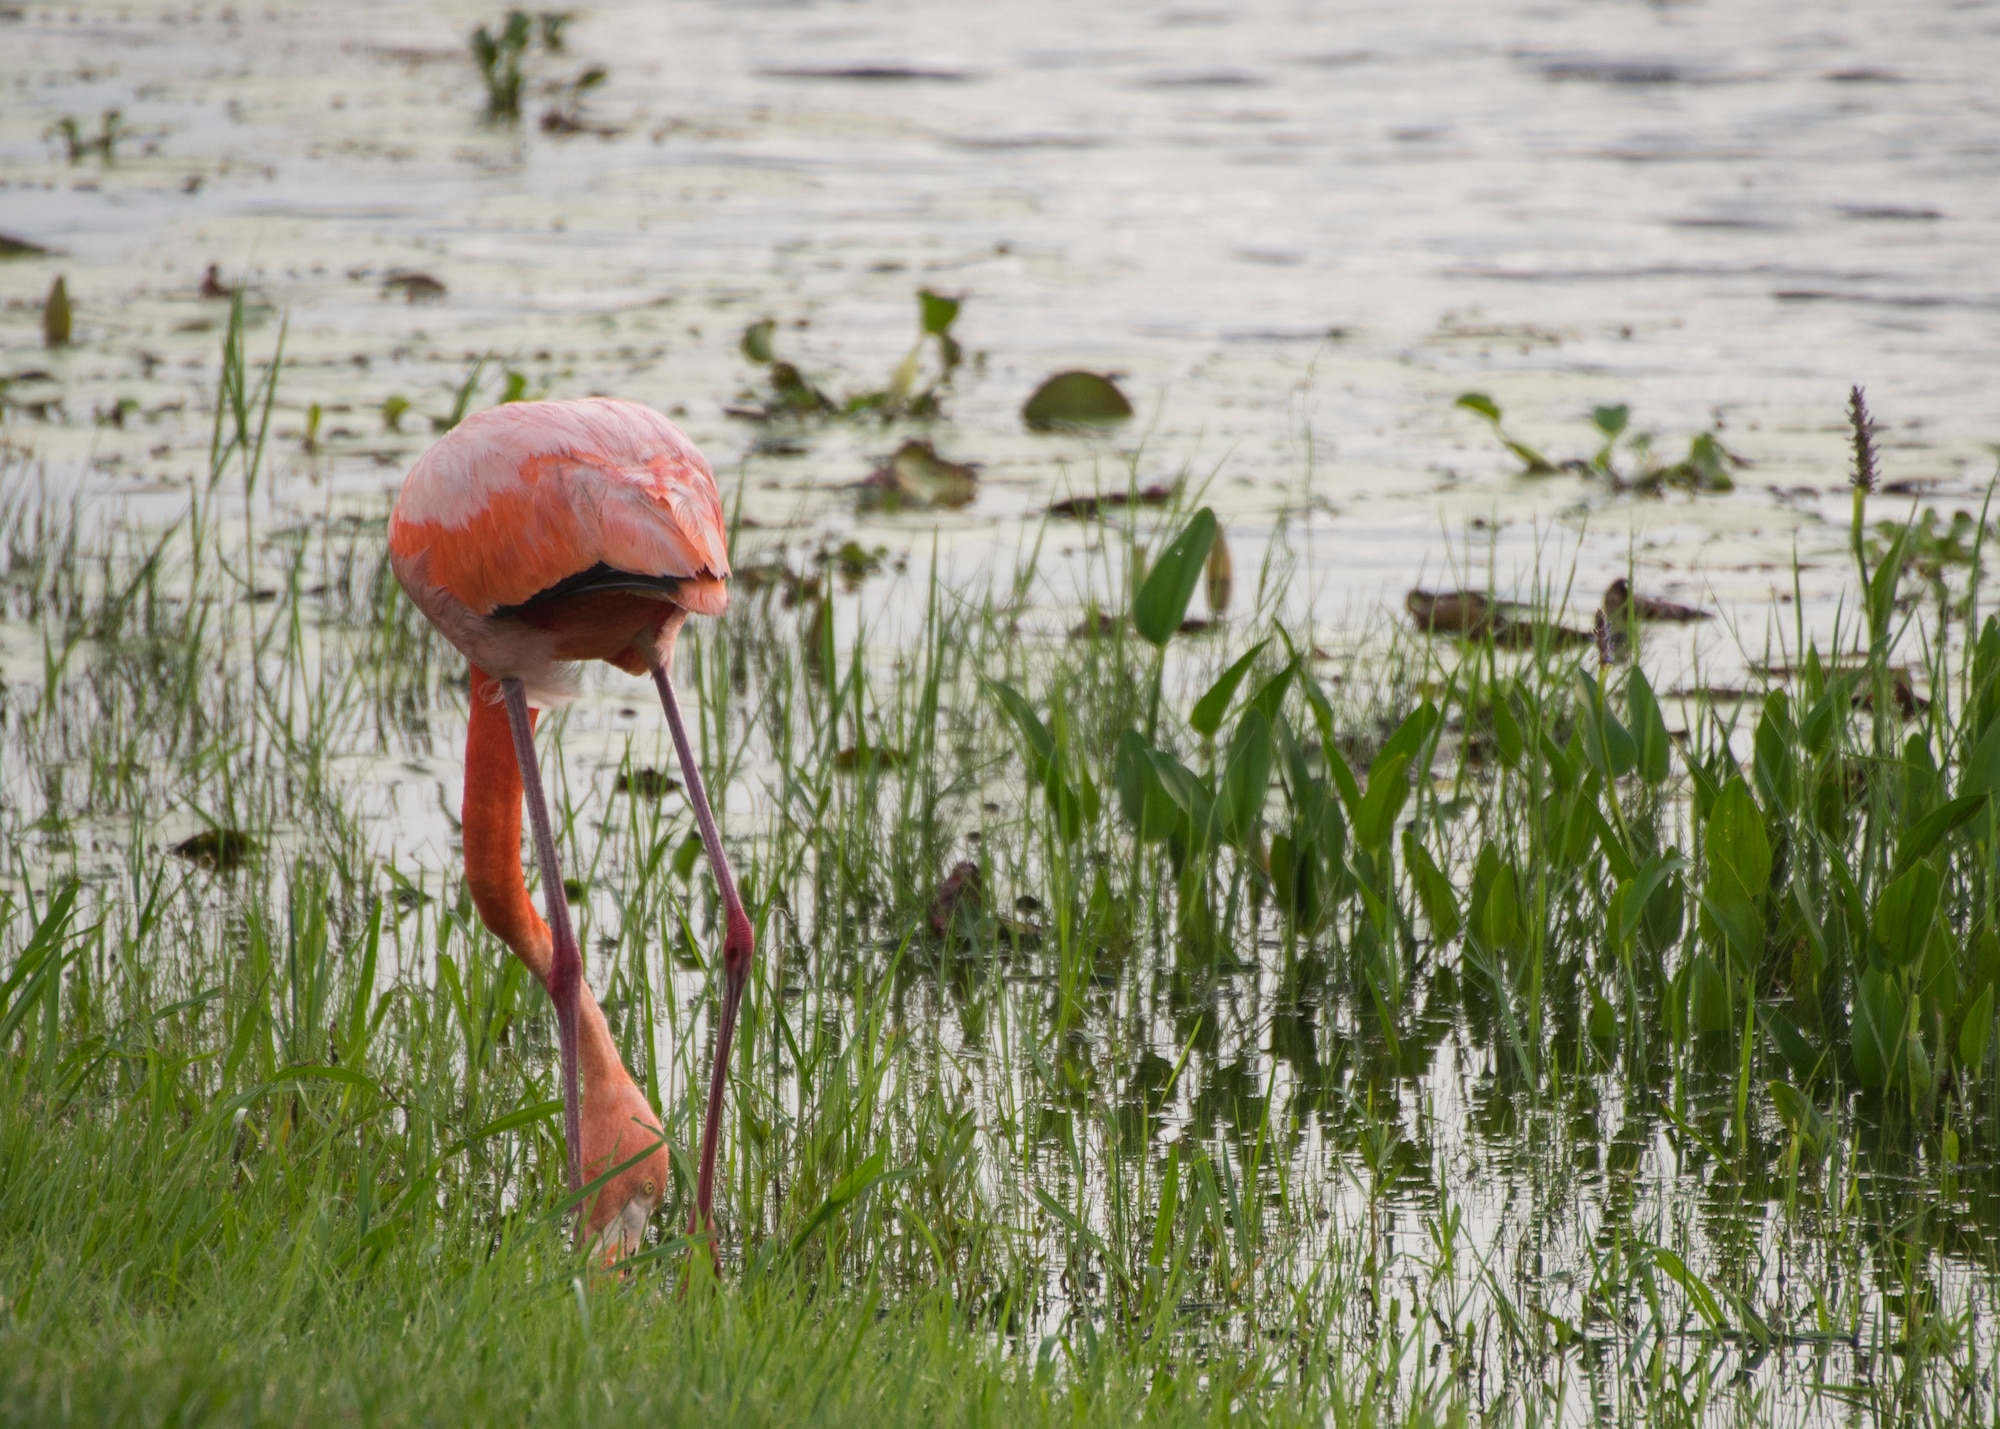 A flamingo feeds nears the bank of Weekly Pond June 23 at Eglin Air Force Base, Fla. According to a Jackson Guard biologist the flamingos may be here because they were caught in a storm or seeking shelter from a weather front. (U.S. Air Force photo/Ilka Cole) 